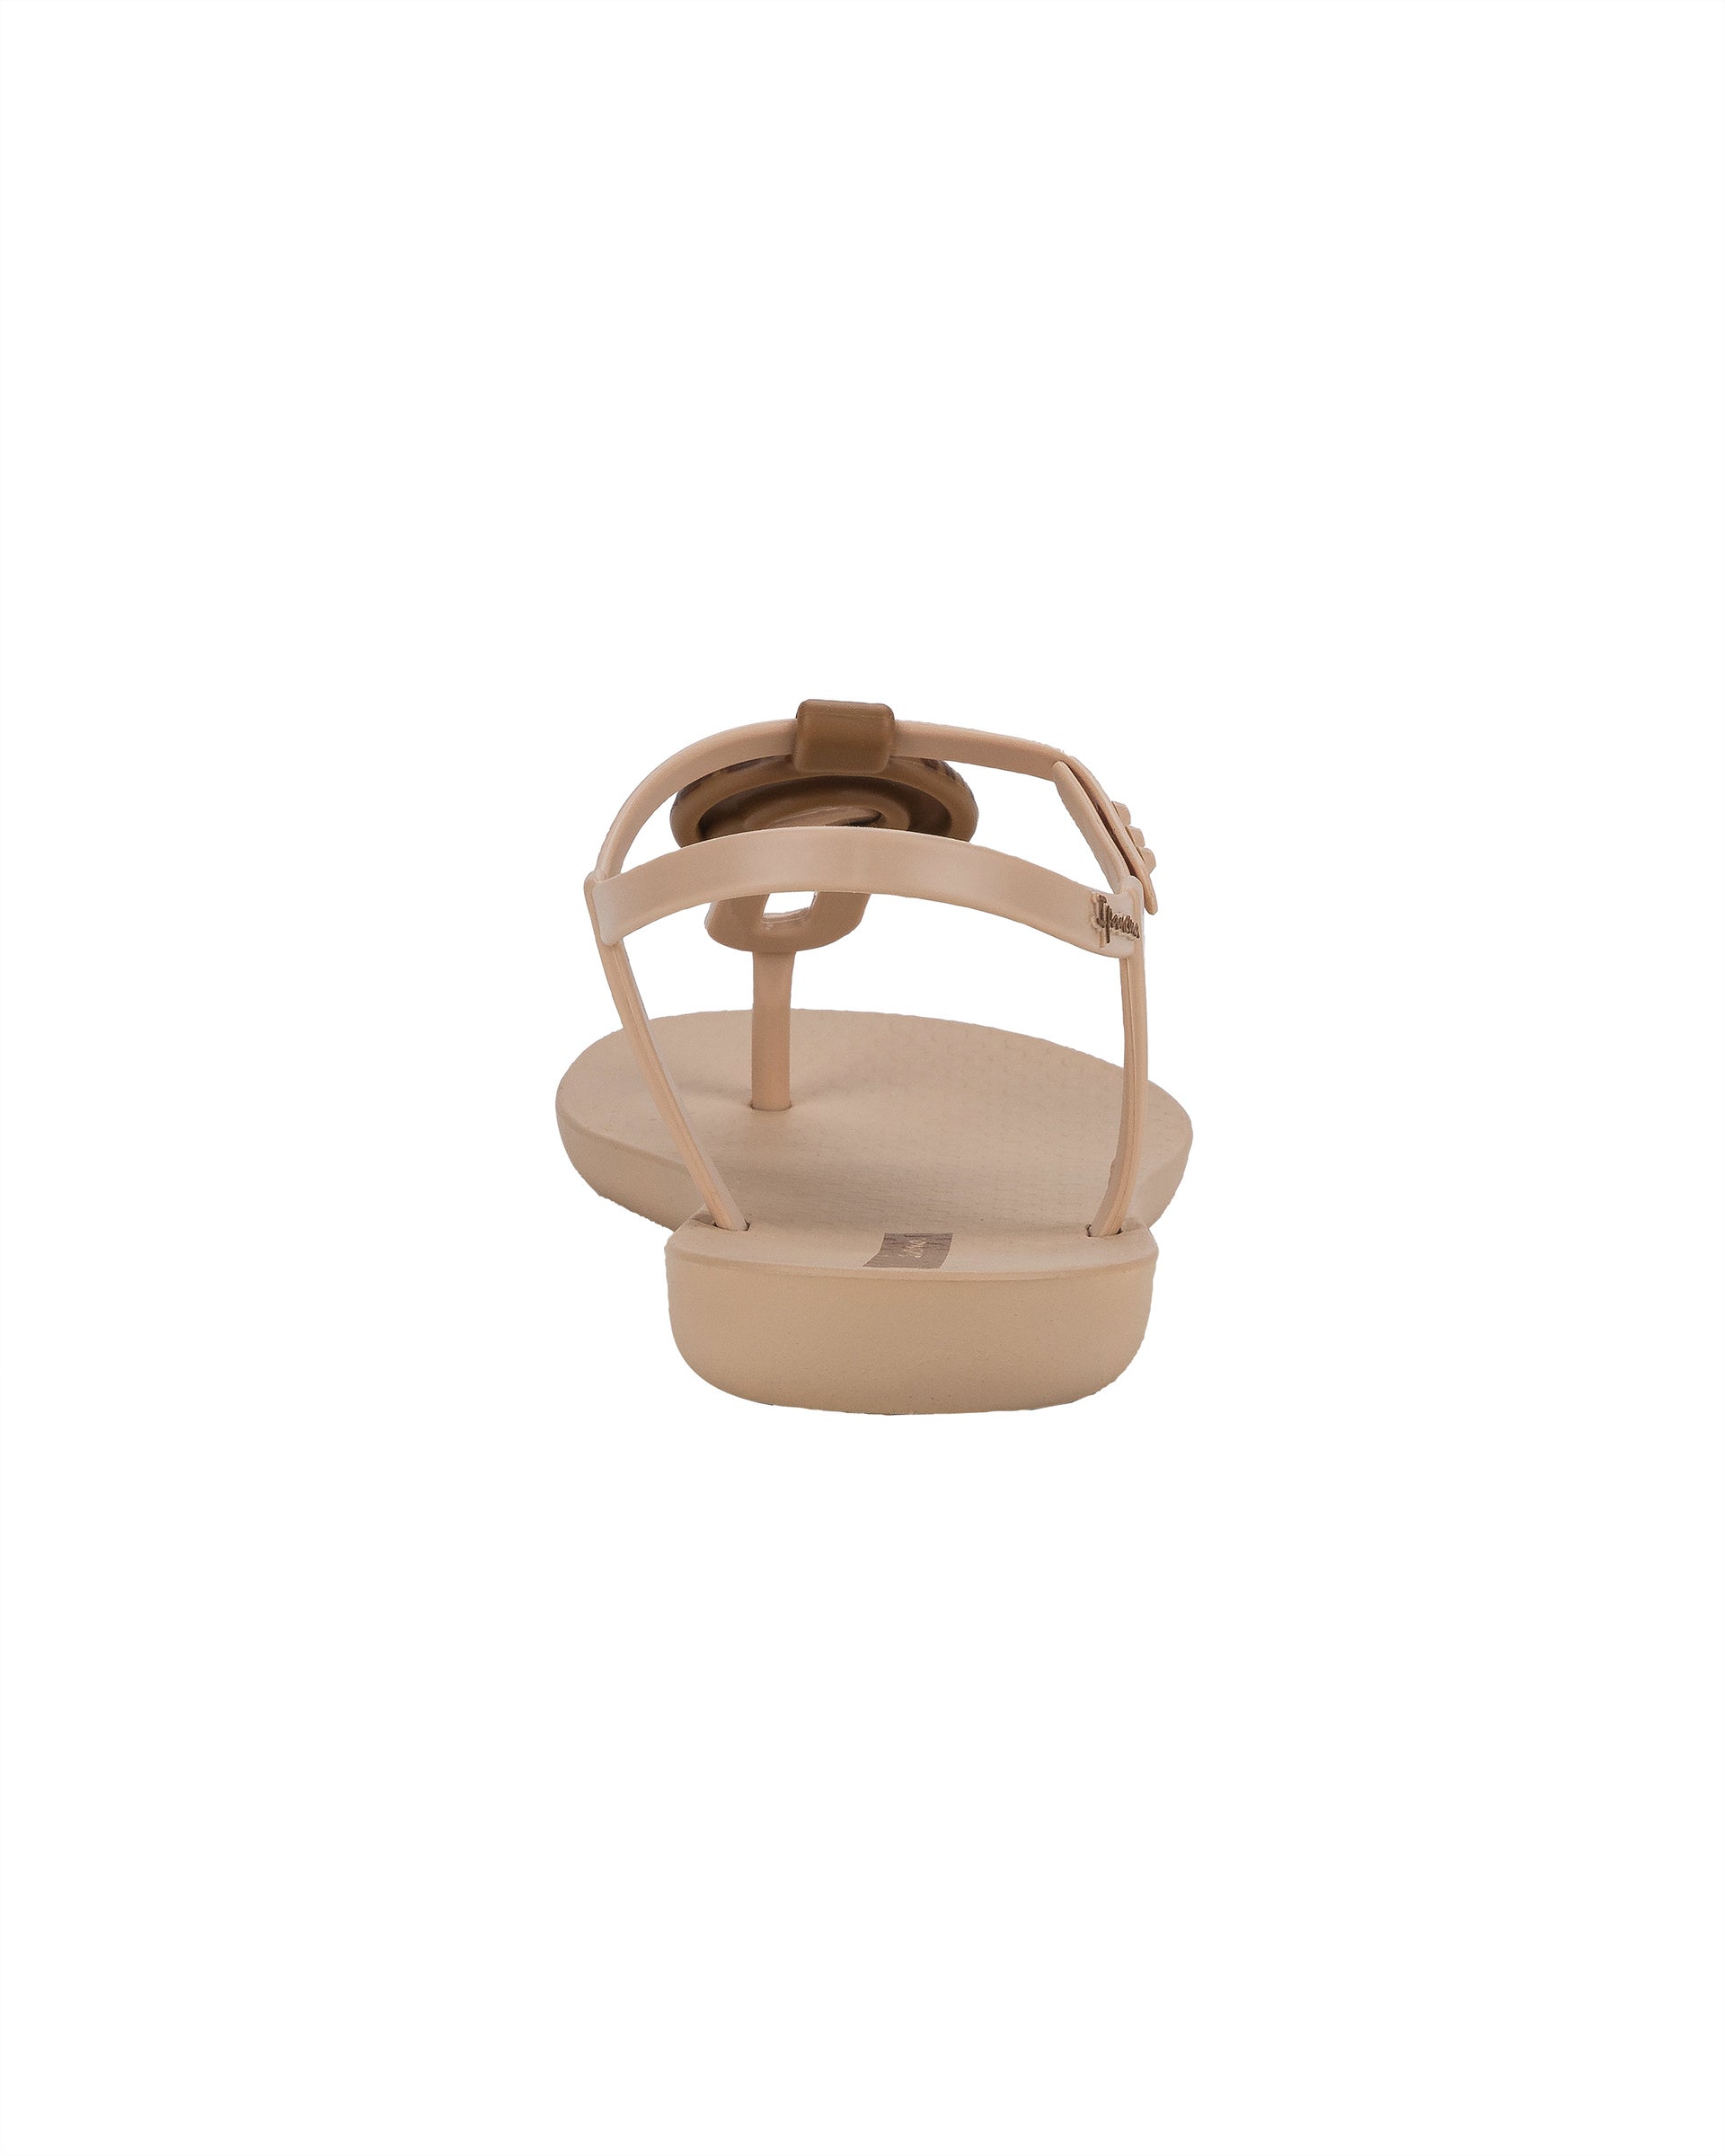 Back view of a beige Ipanema Class Marble women's t-strap sandal.